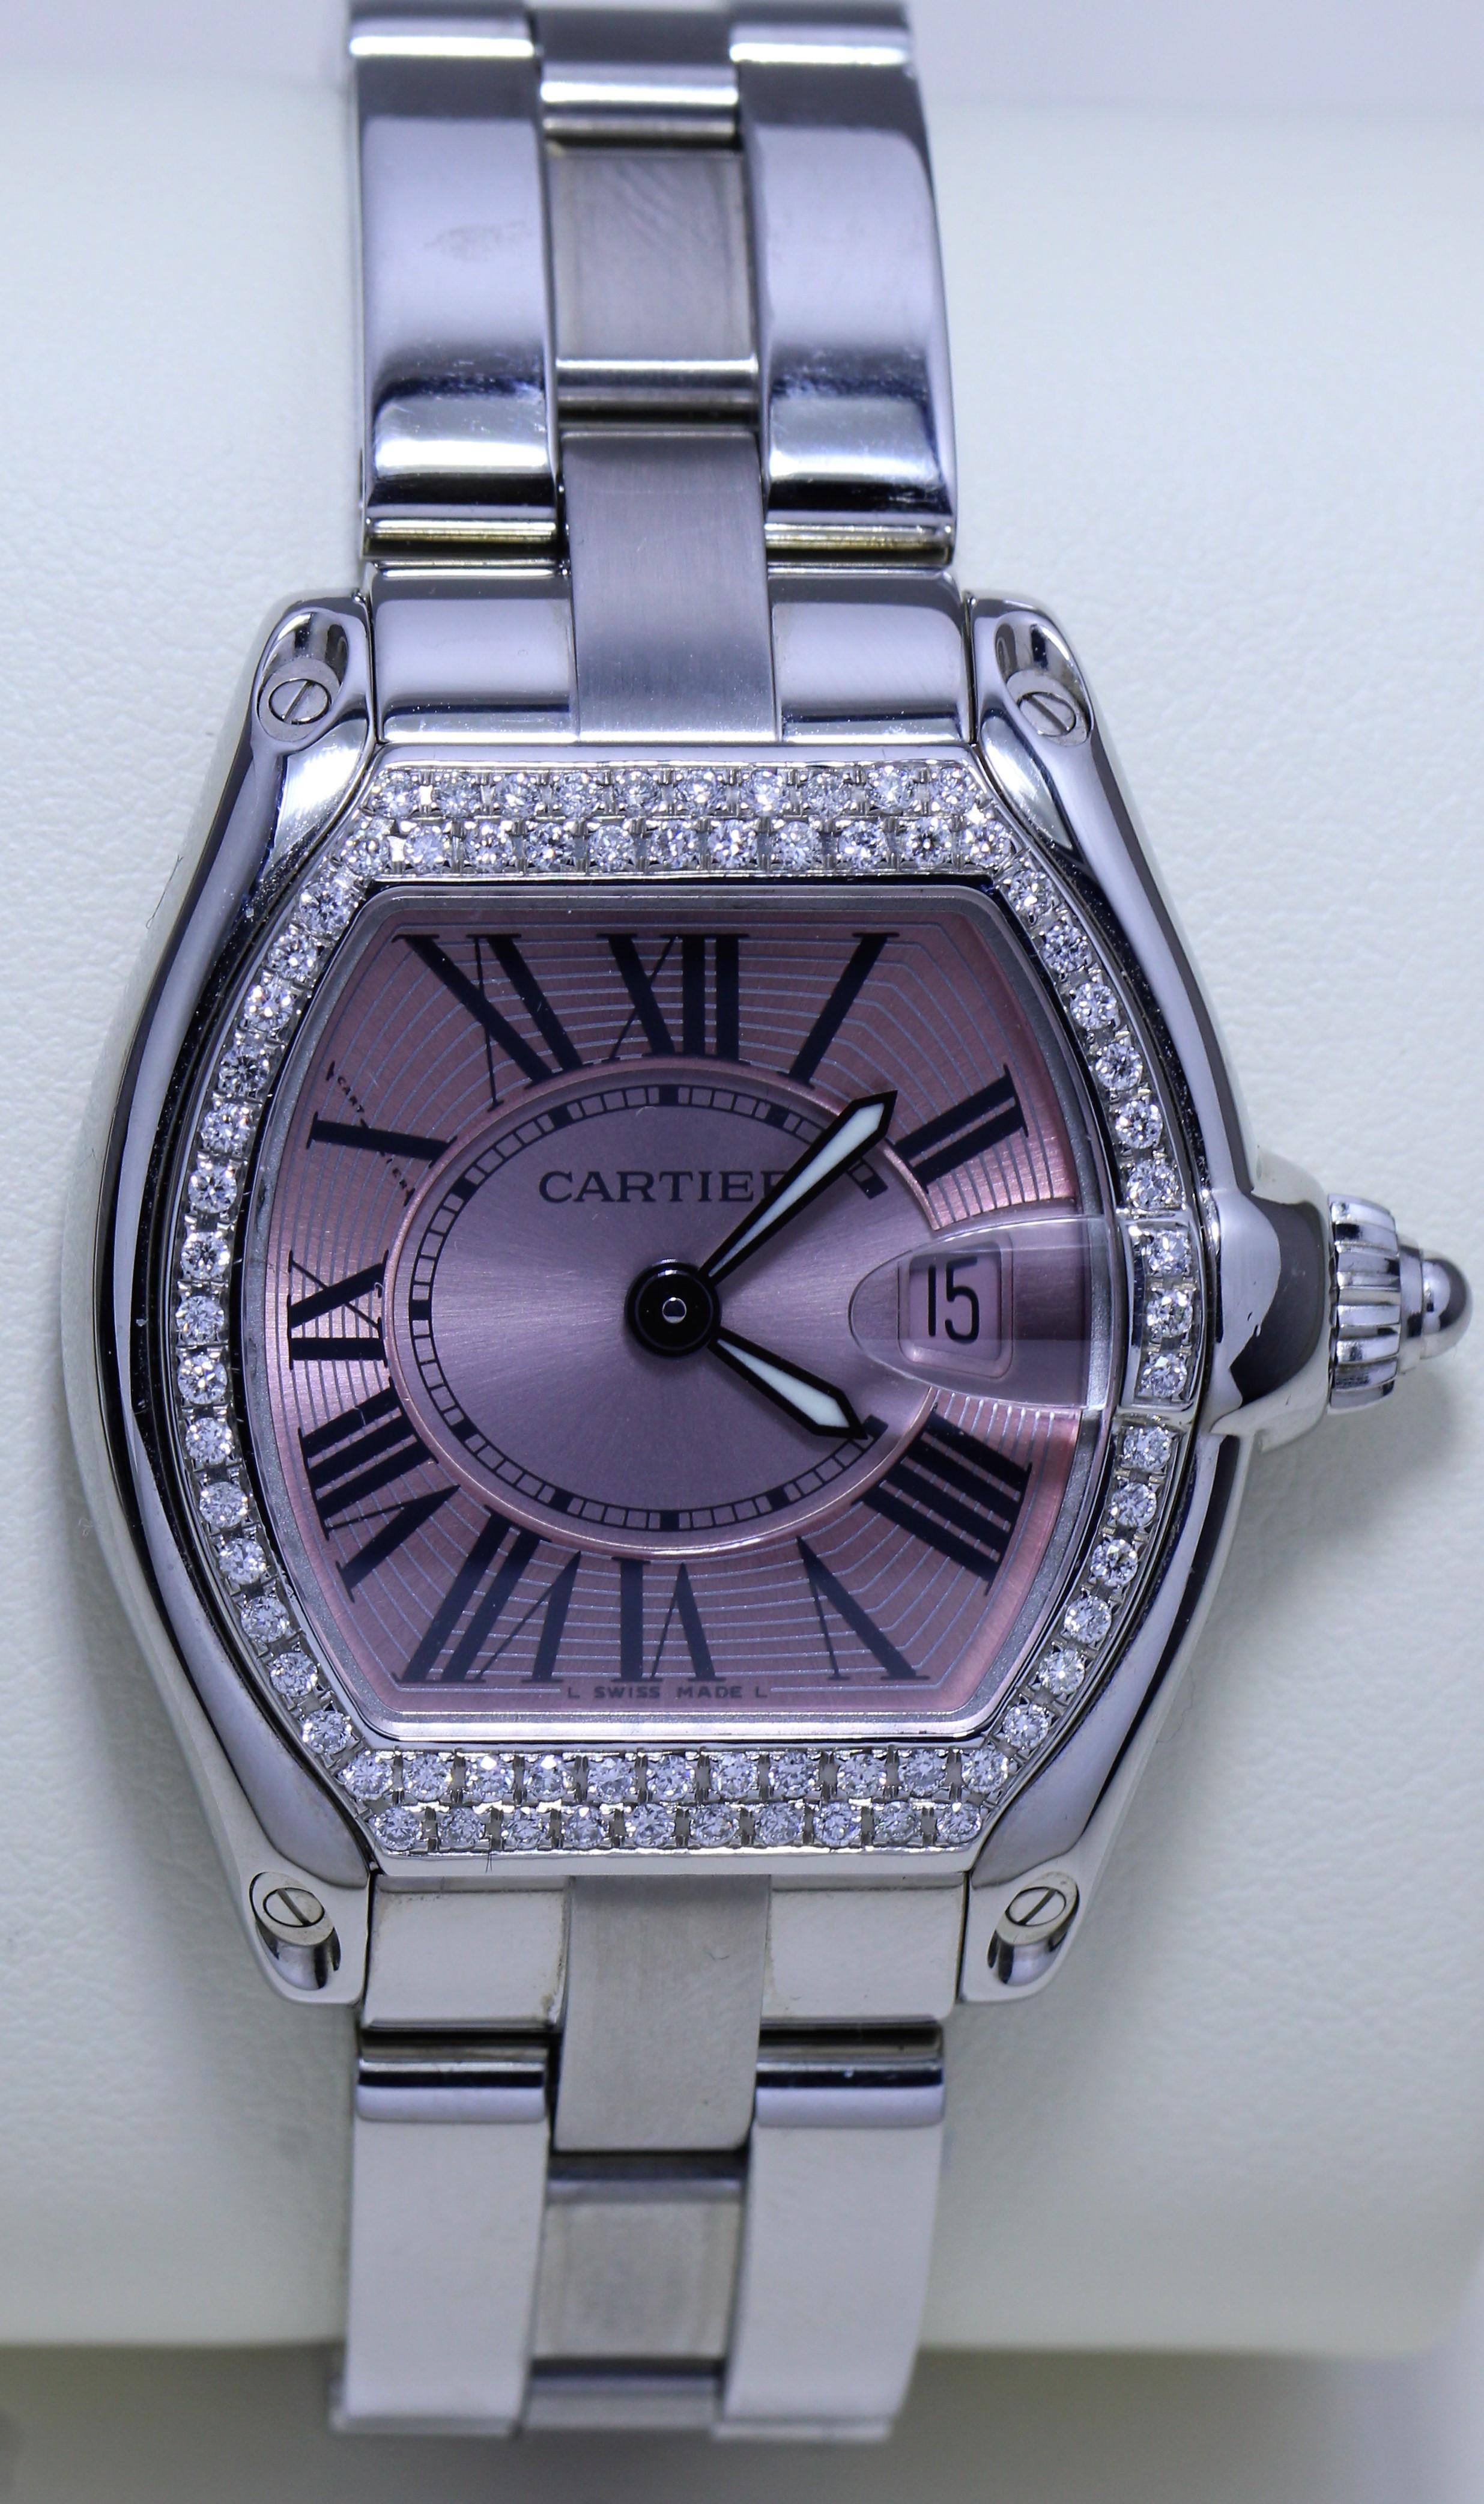 Cartier Roadster Diamond Studded Wristwatch In Good Condition For Sale In New York, NY